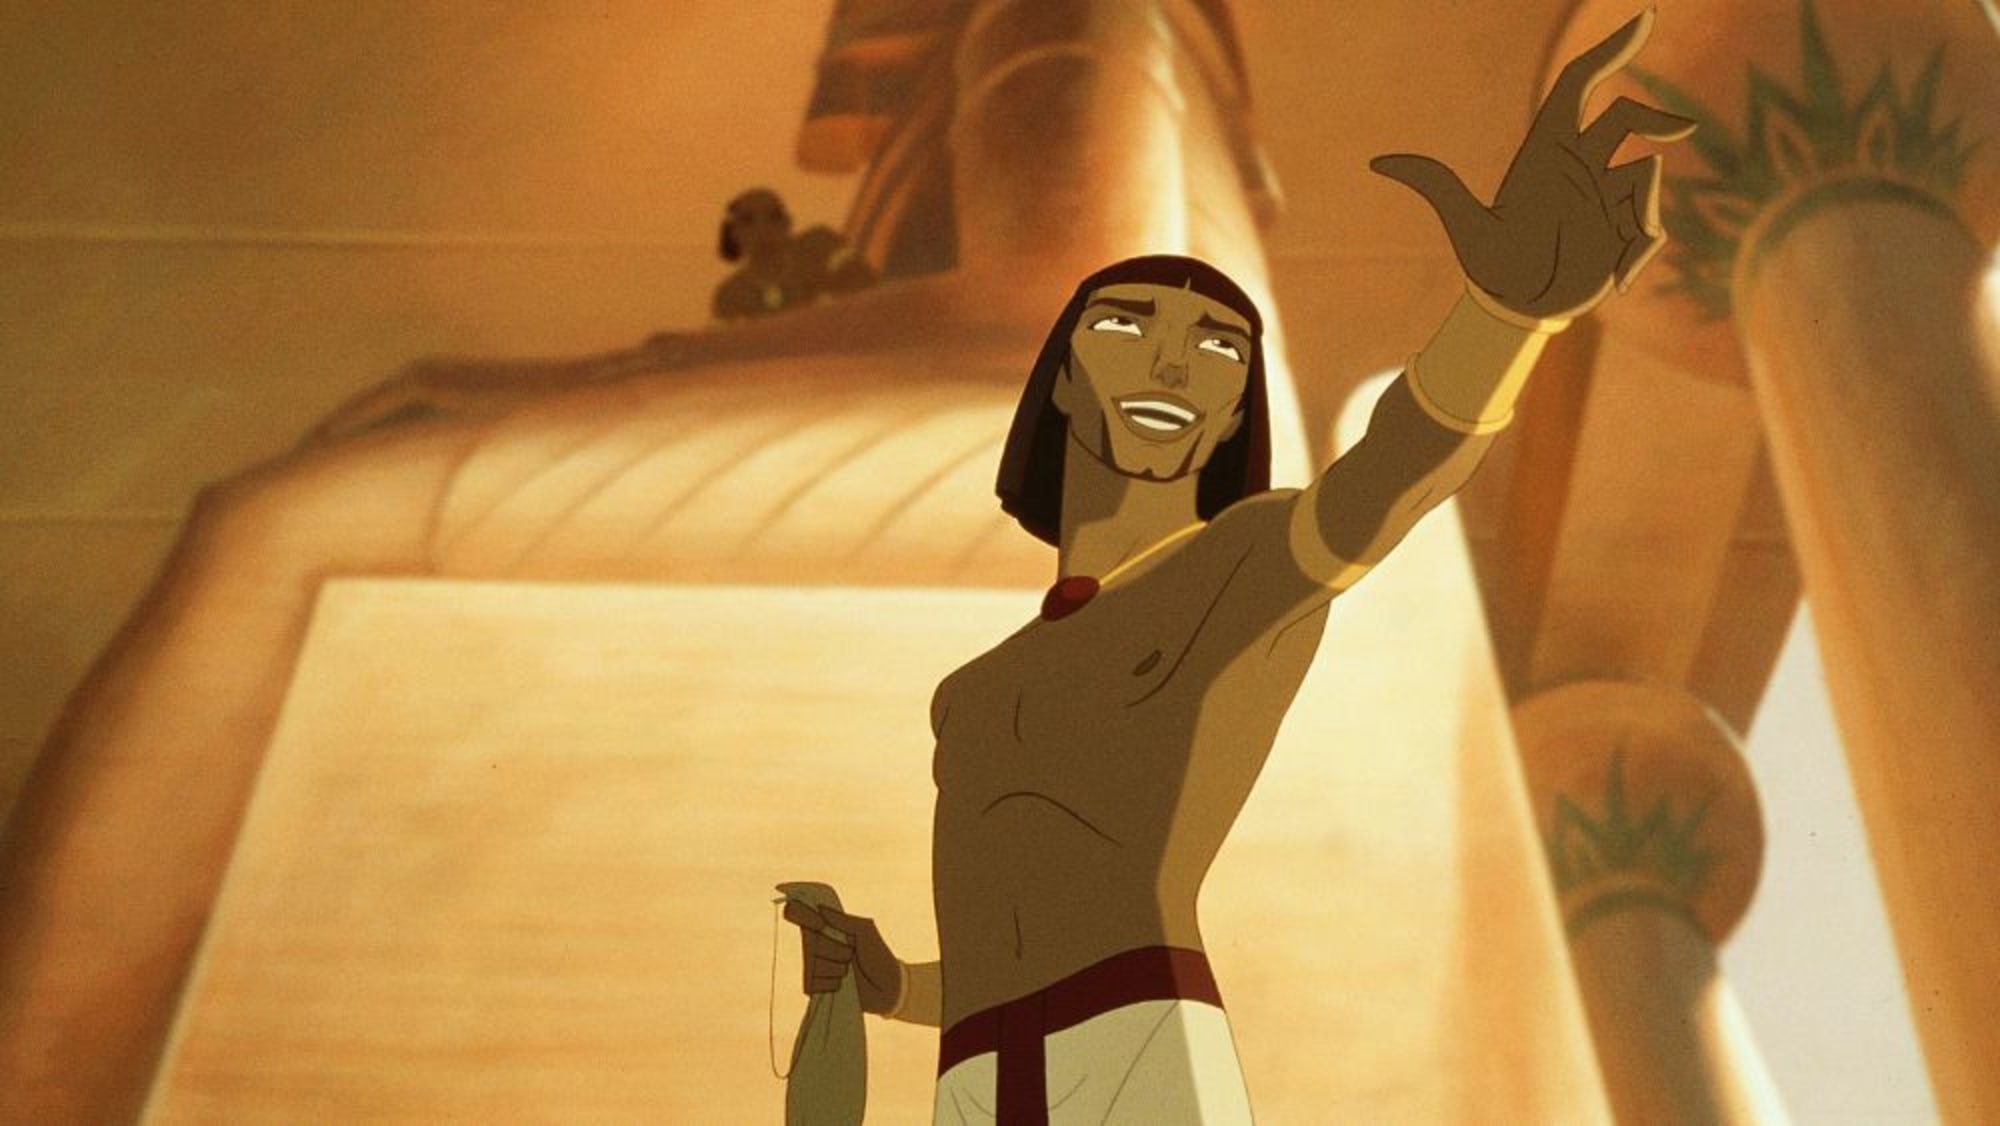 How The Prince of Egypt changed animated storytelling 20 years ago